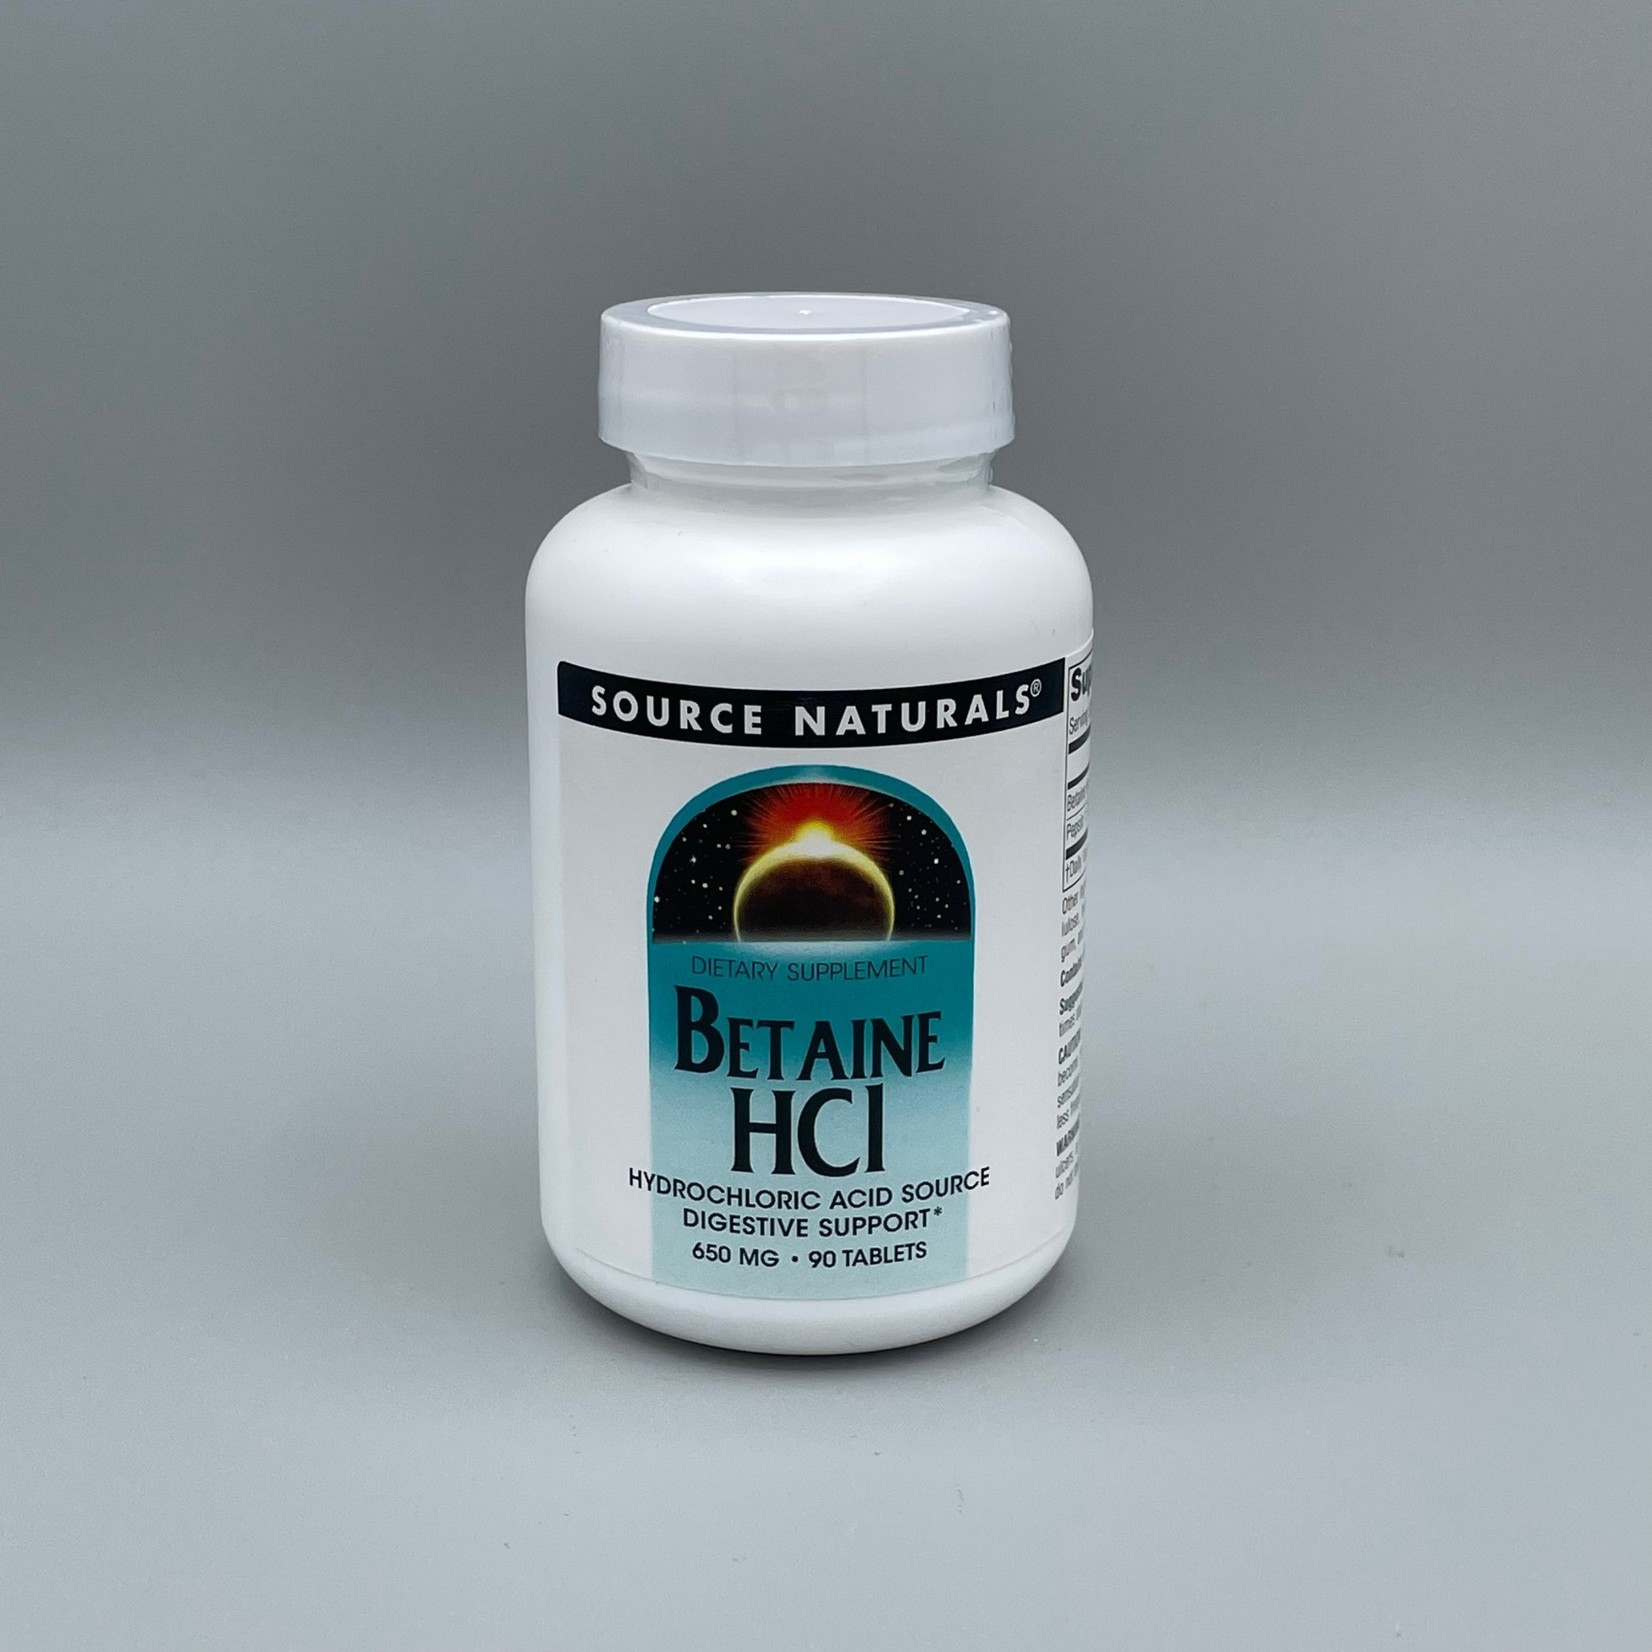 Source Naturals Betaine HCl (Hydrochloric Acid Source) - 650 mg, 90 Tablets